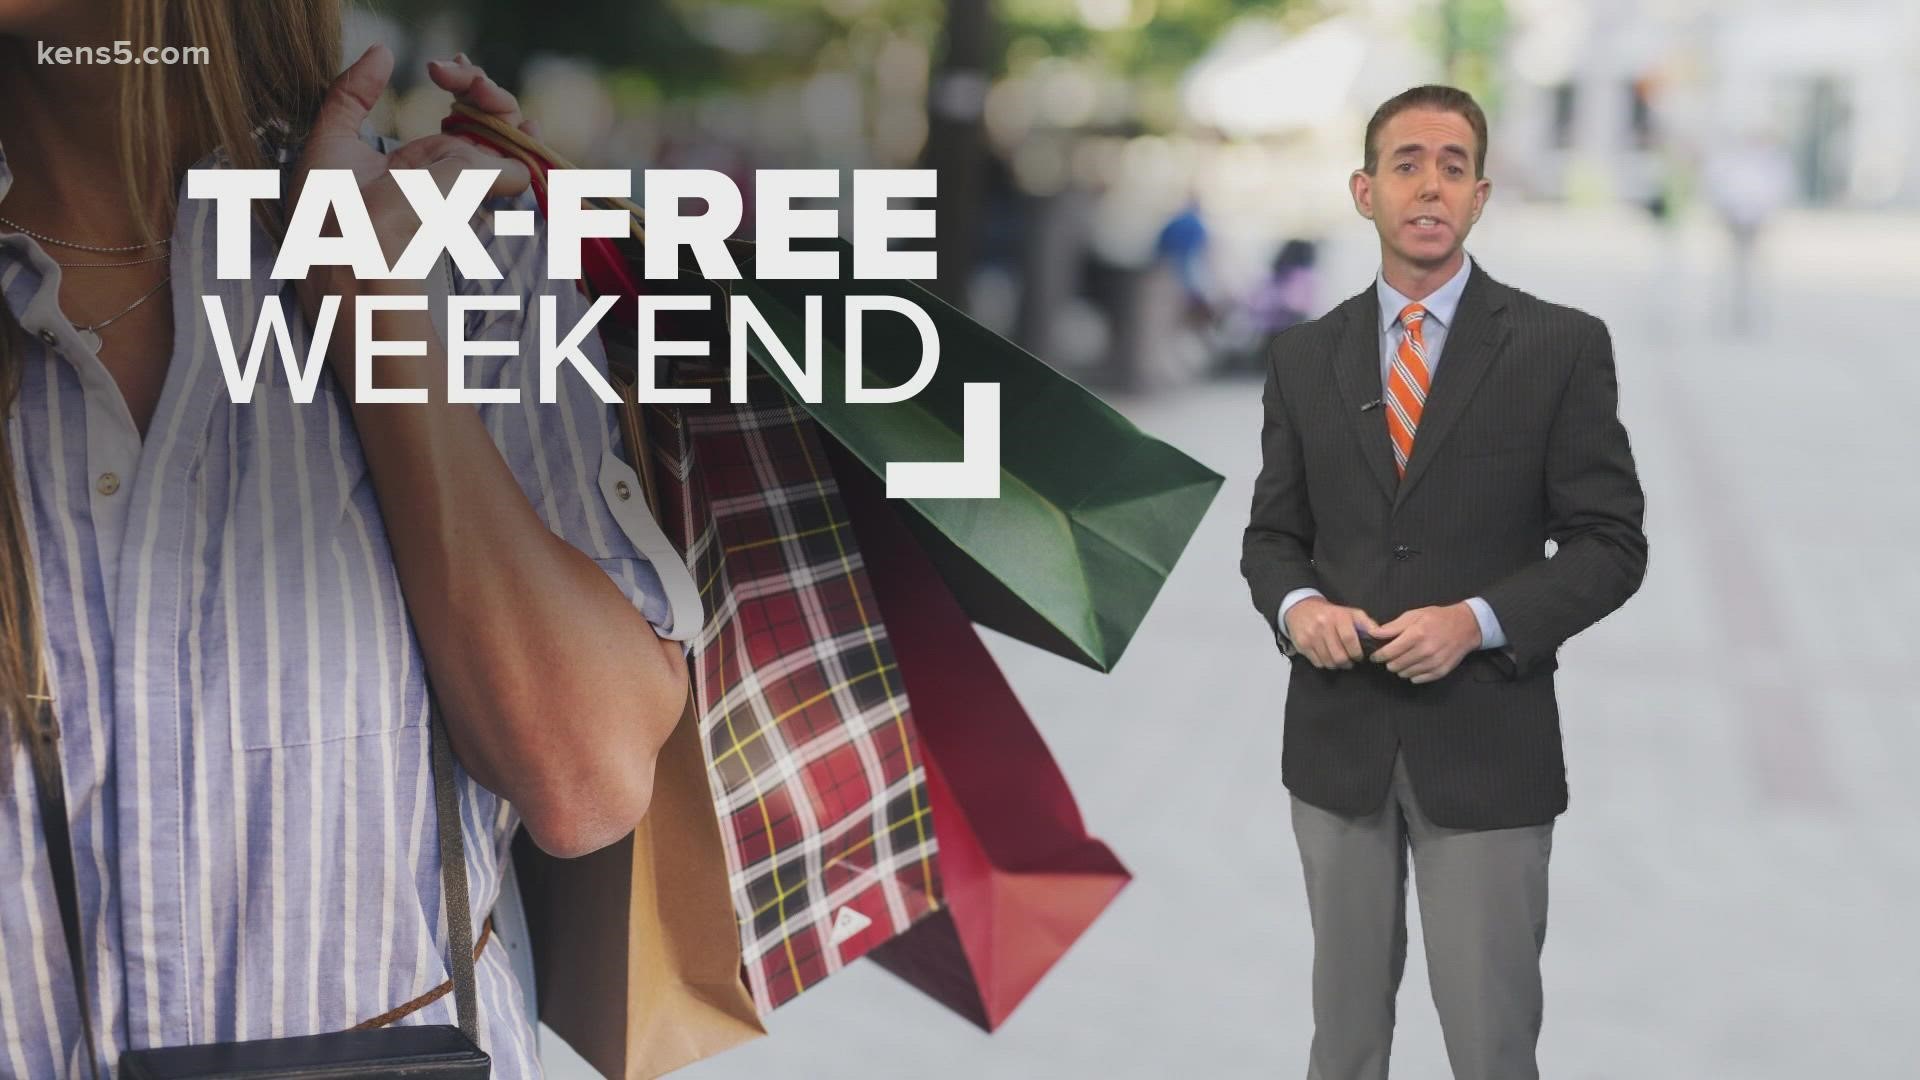 You don't have to head to crowded stories to save money on back-to-school supplies and clothes this weekend.